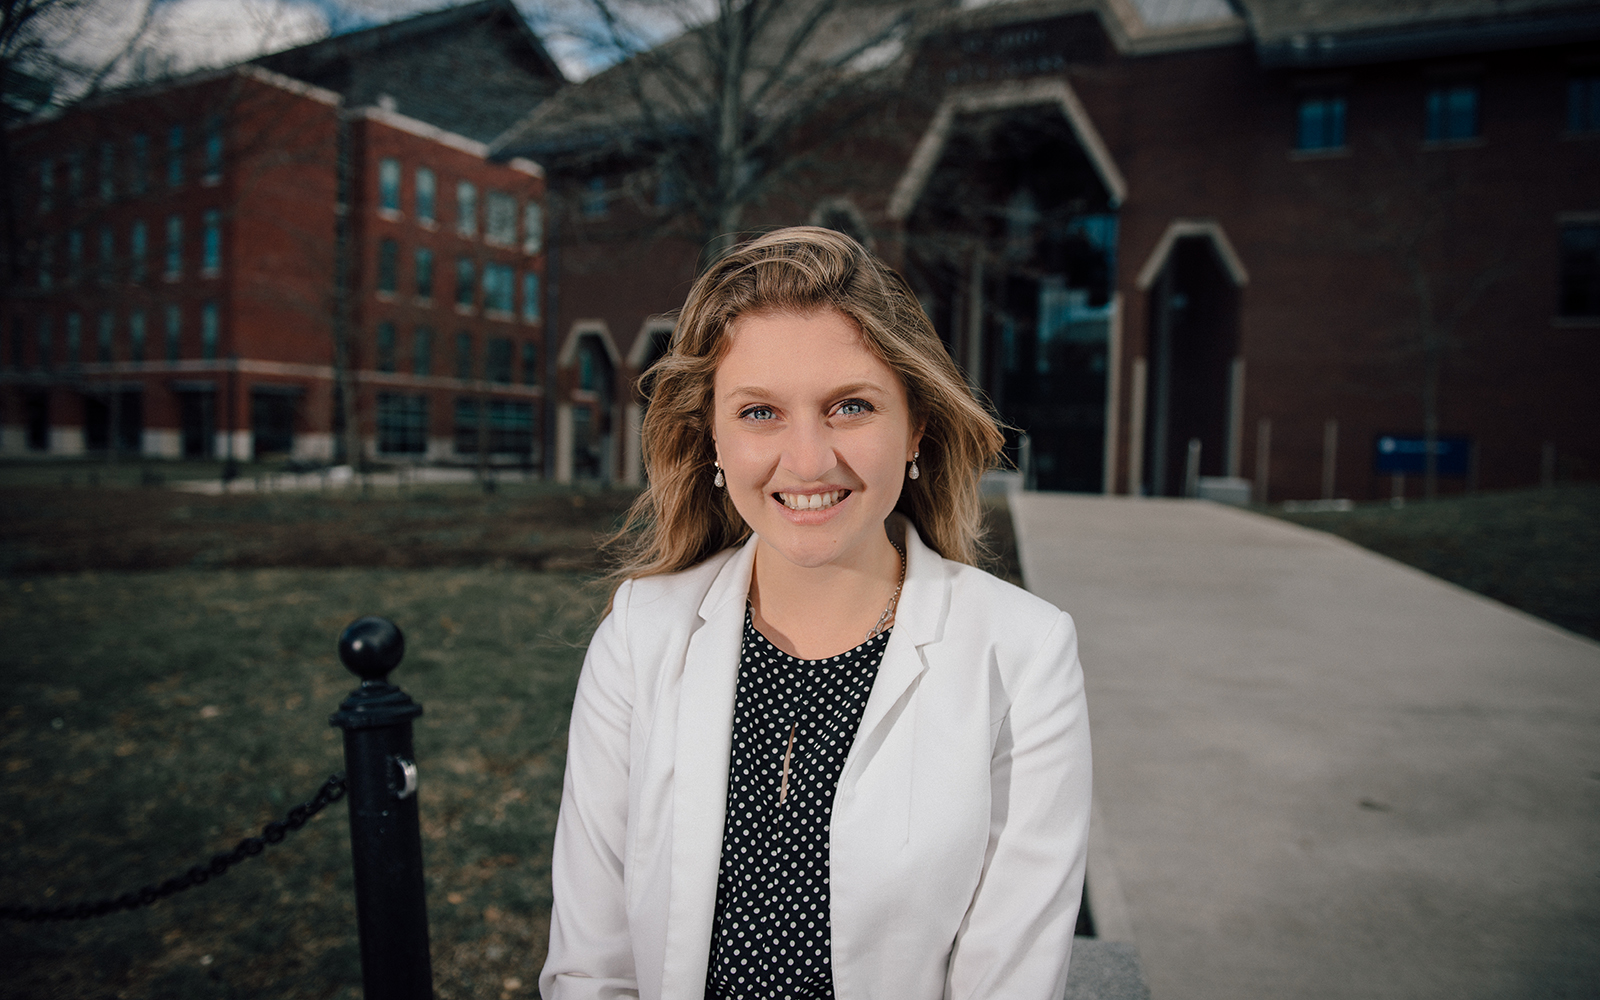 Margo Bailey, a senior honors student majoring in marketing, is the sole recipient of the competitive Fulbright Scholarship to earn a master's degree in management at IE Business School in Madrid, Spain. (Nathan Oldham/UConn School of Business)